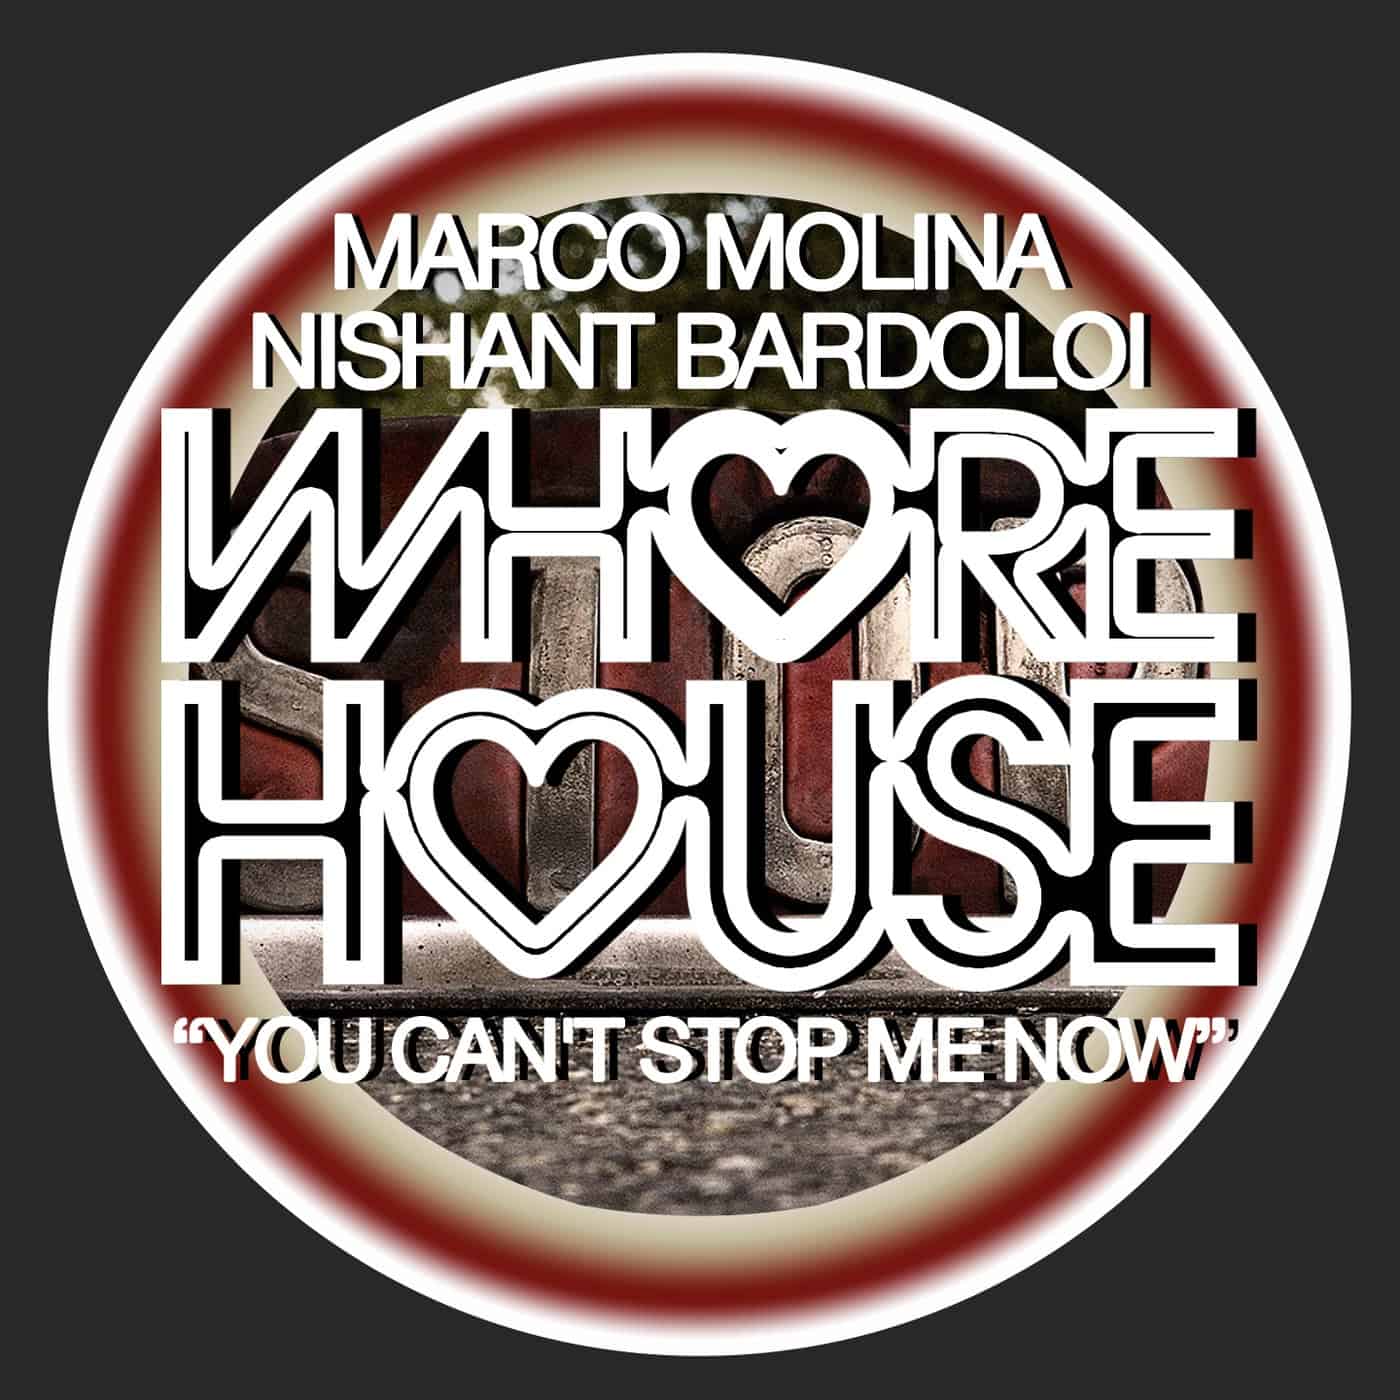 image cover: Marco Molina, Nishant Bardoloi - You Can't Stop Me Now on Whore House